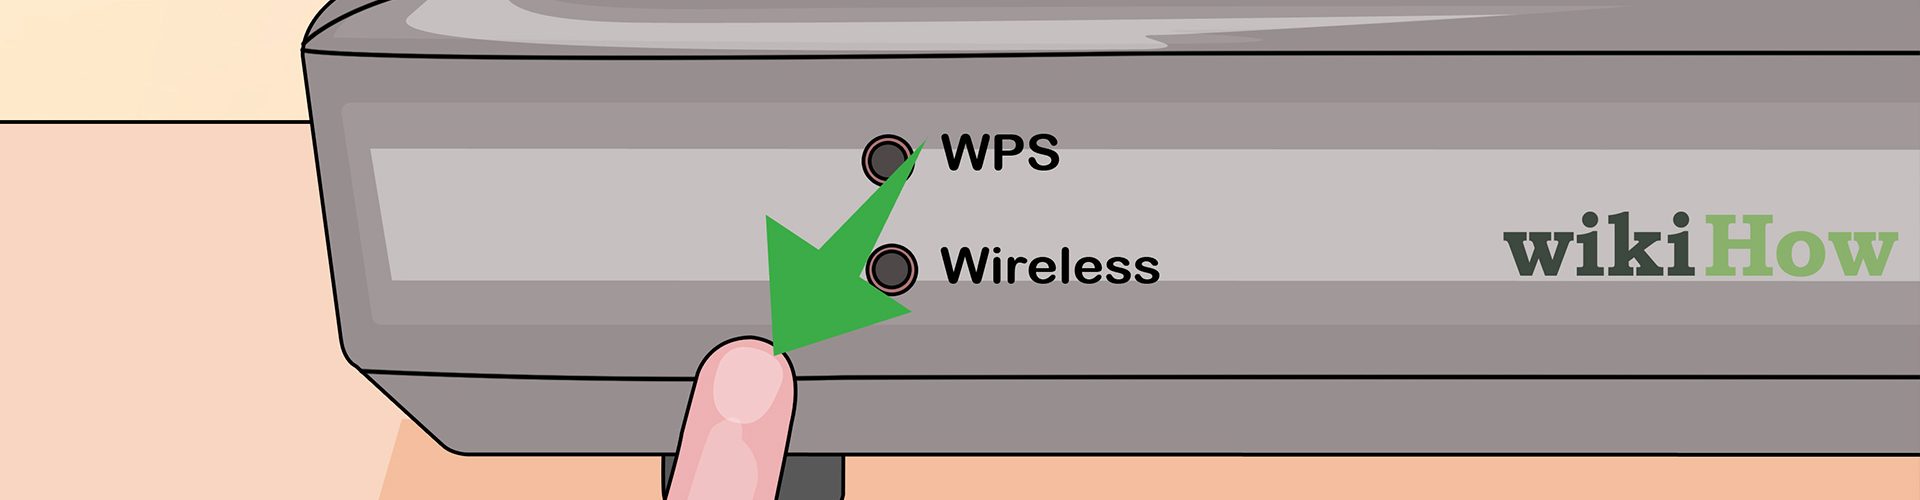 how to connect to wps for computer